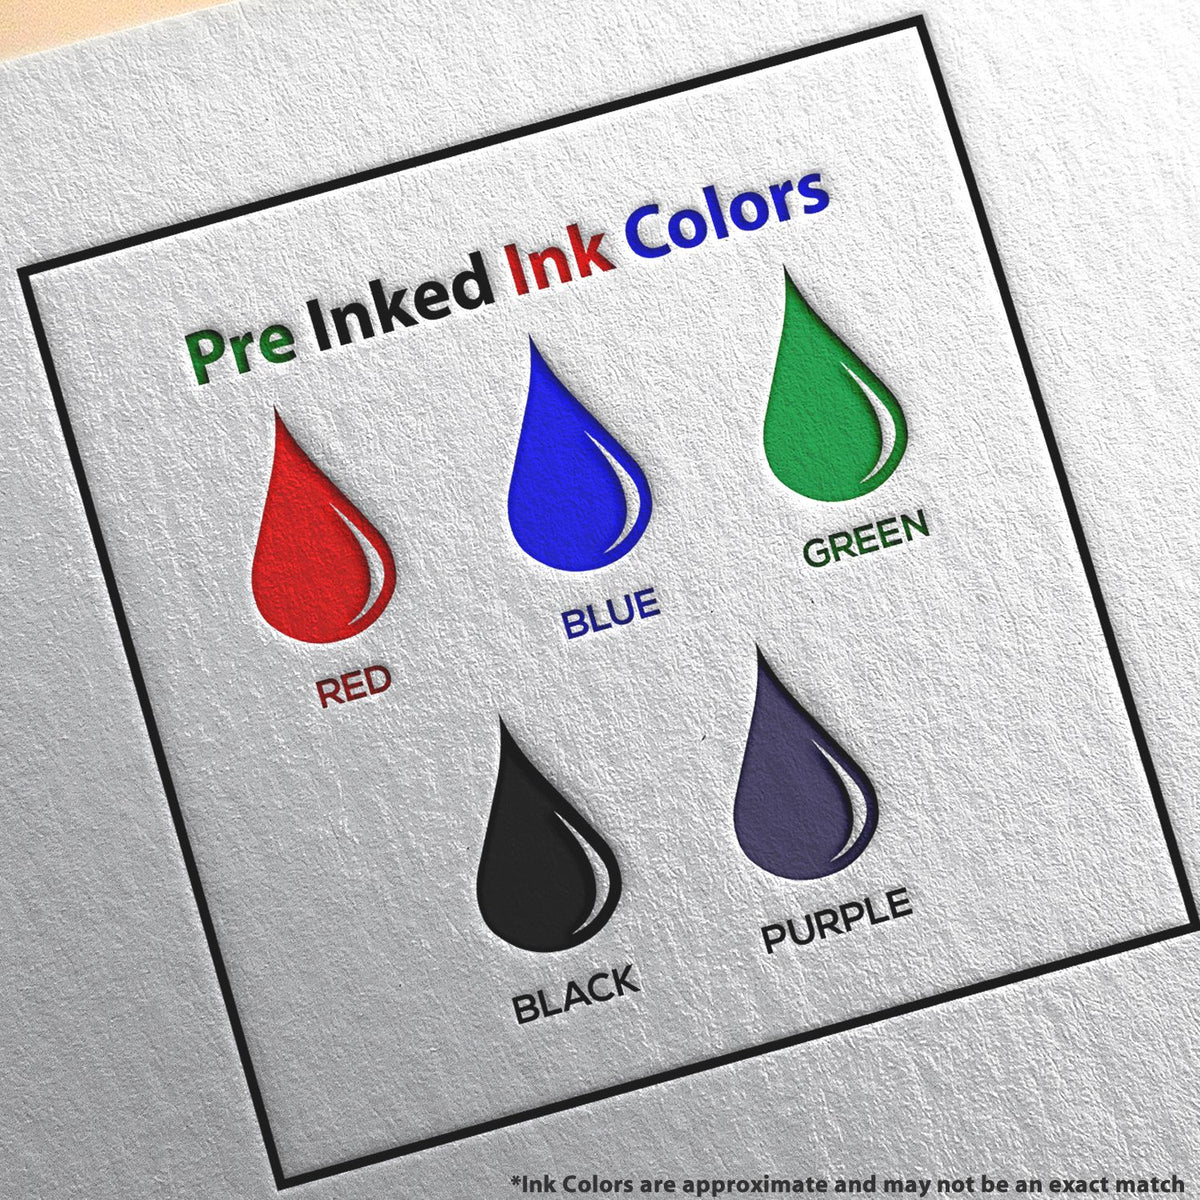 A picture showing the different ink colors or hues available for the Super Slim Nebraska Notary Public Stamp product.